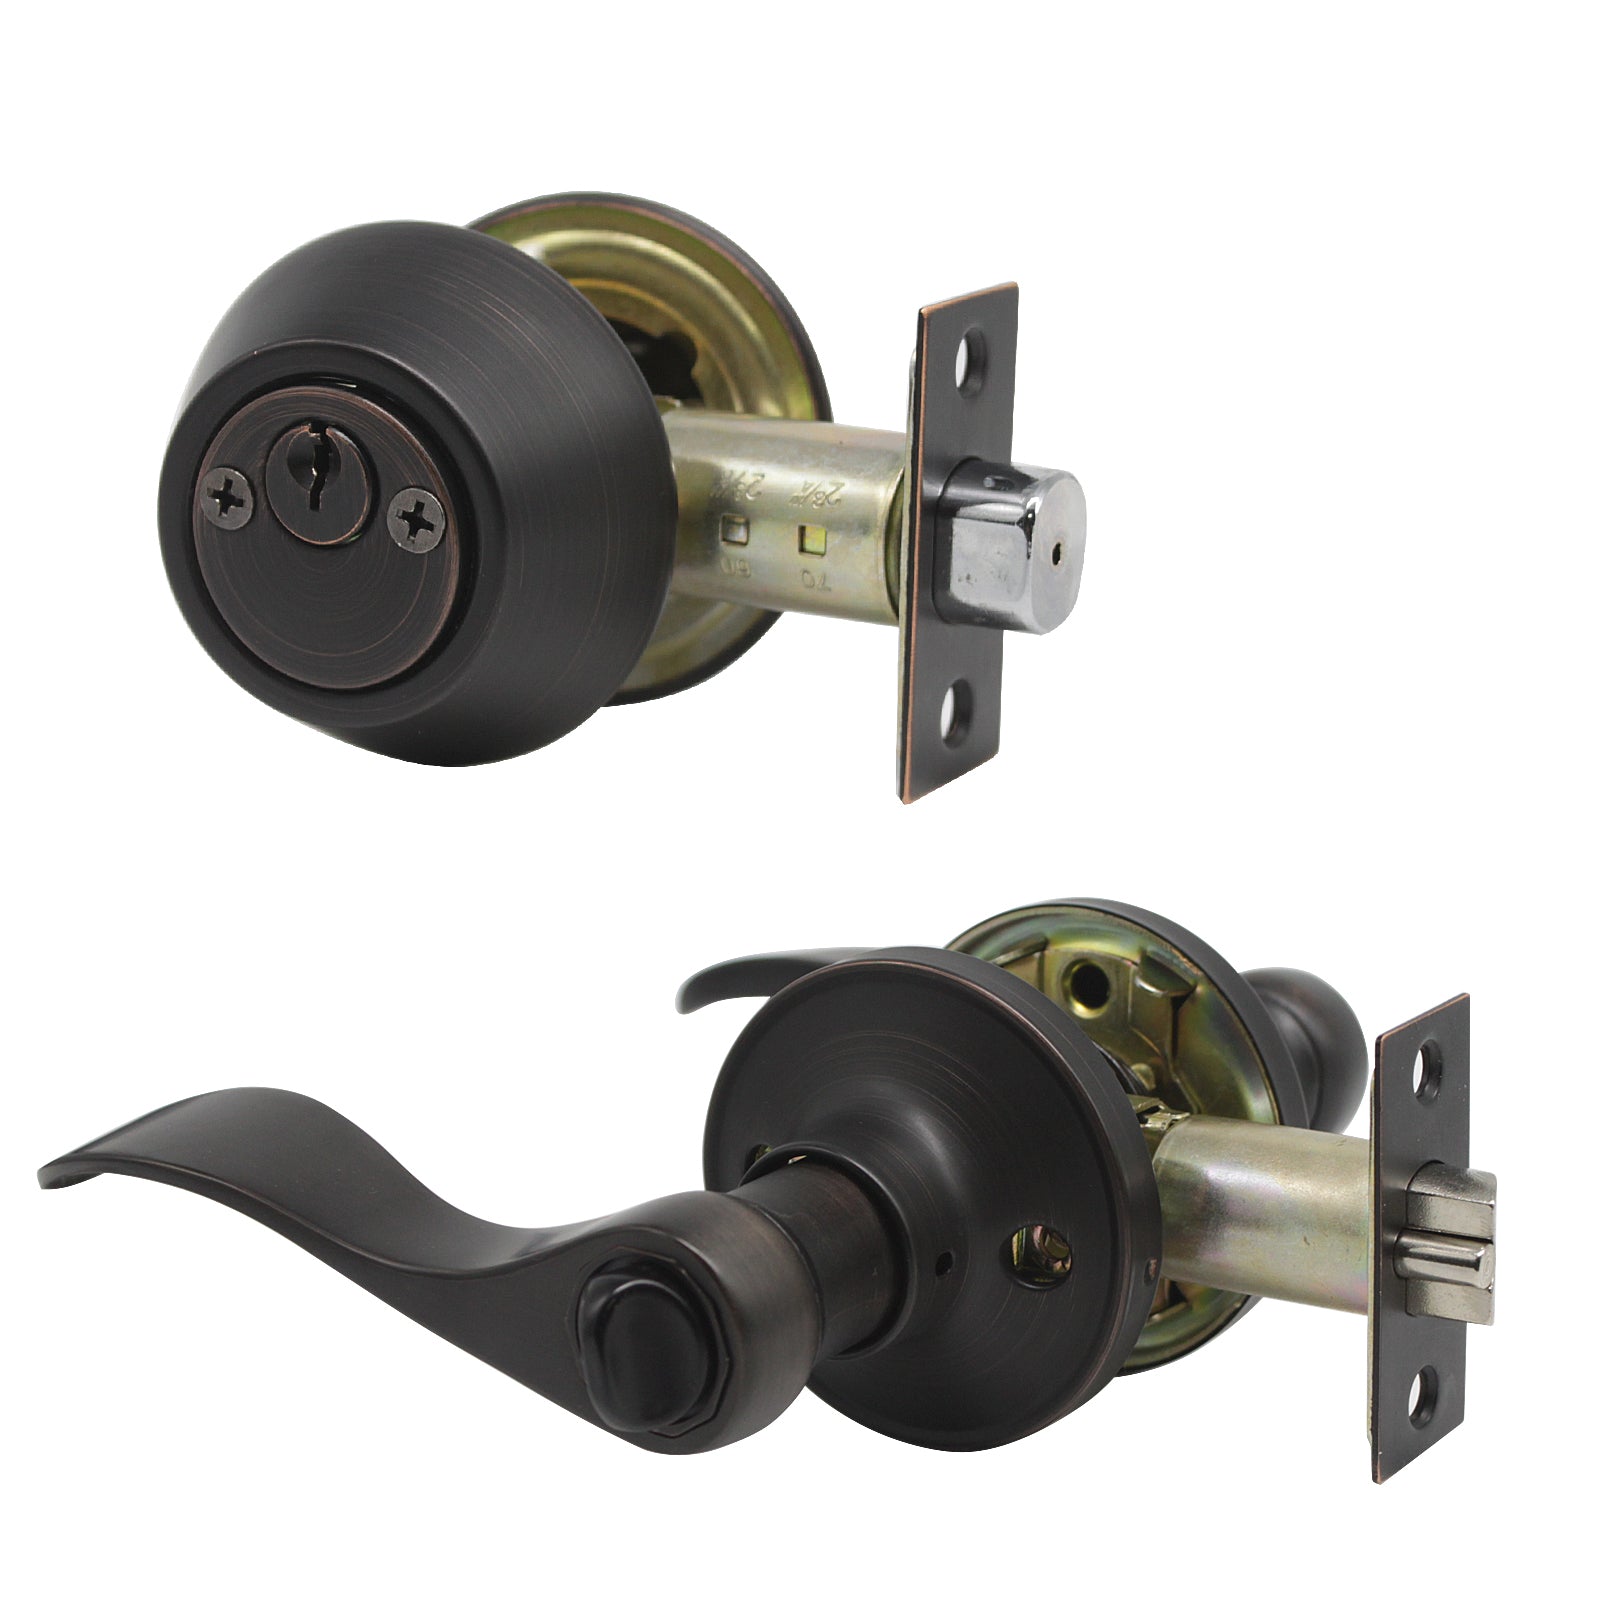 Entry Keyed Door Levers Lock with Double Cylinder Deadbolts Keyed